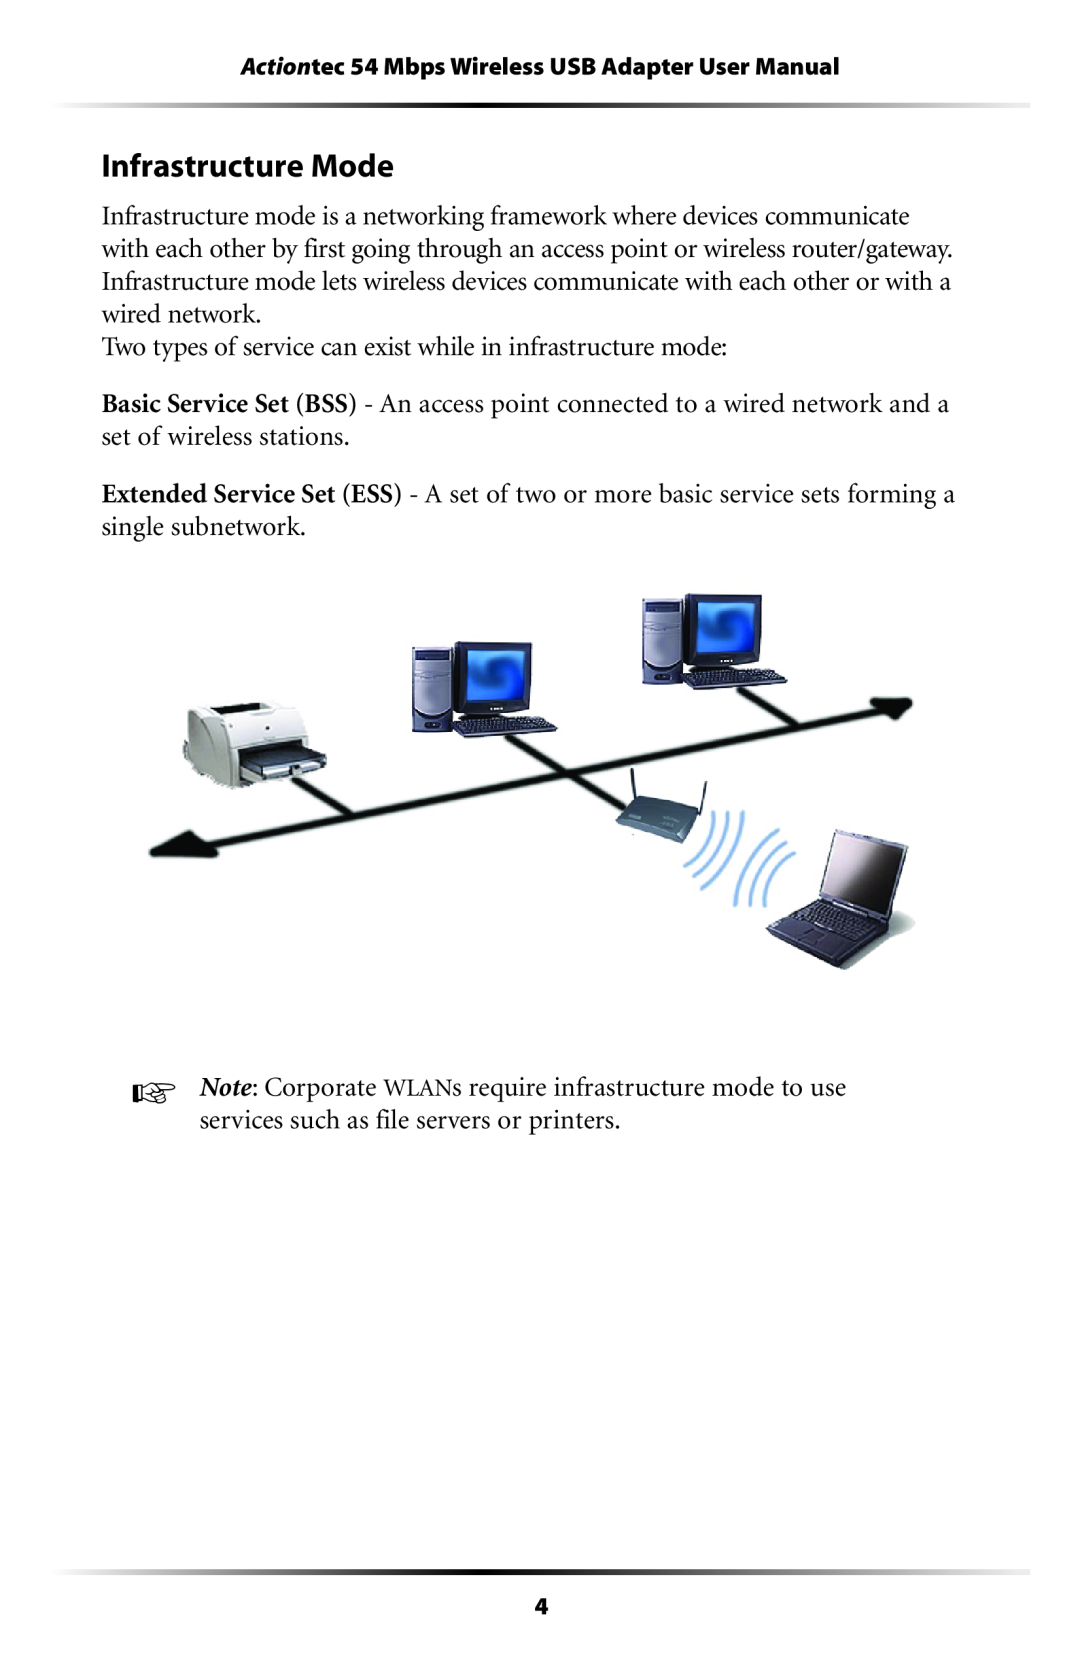 Actiontec electronic 802UIG user manual Infrastructure Mode 